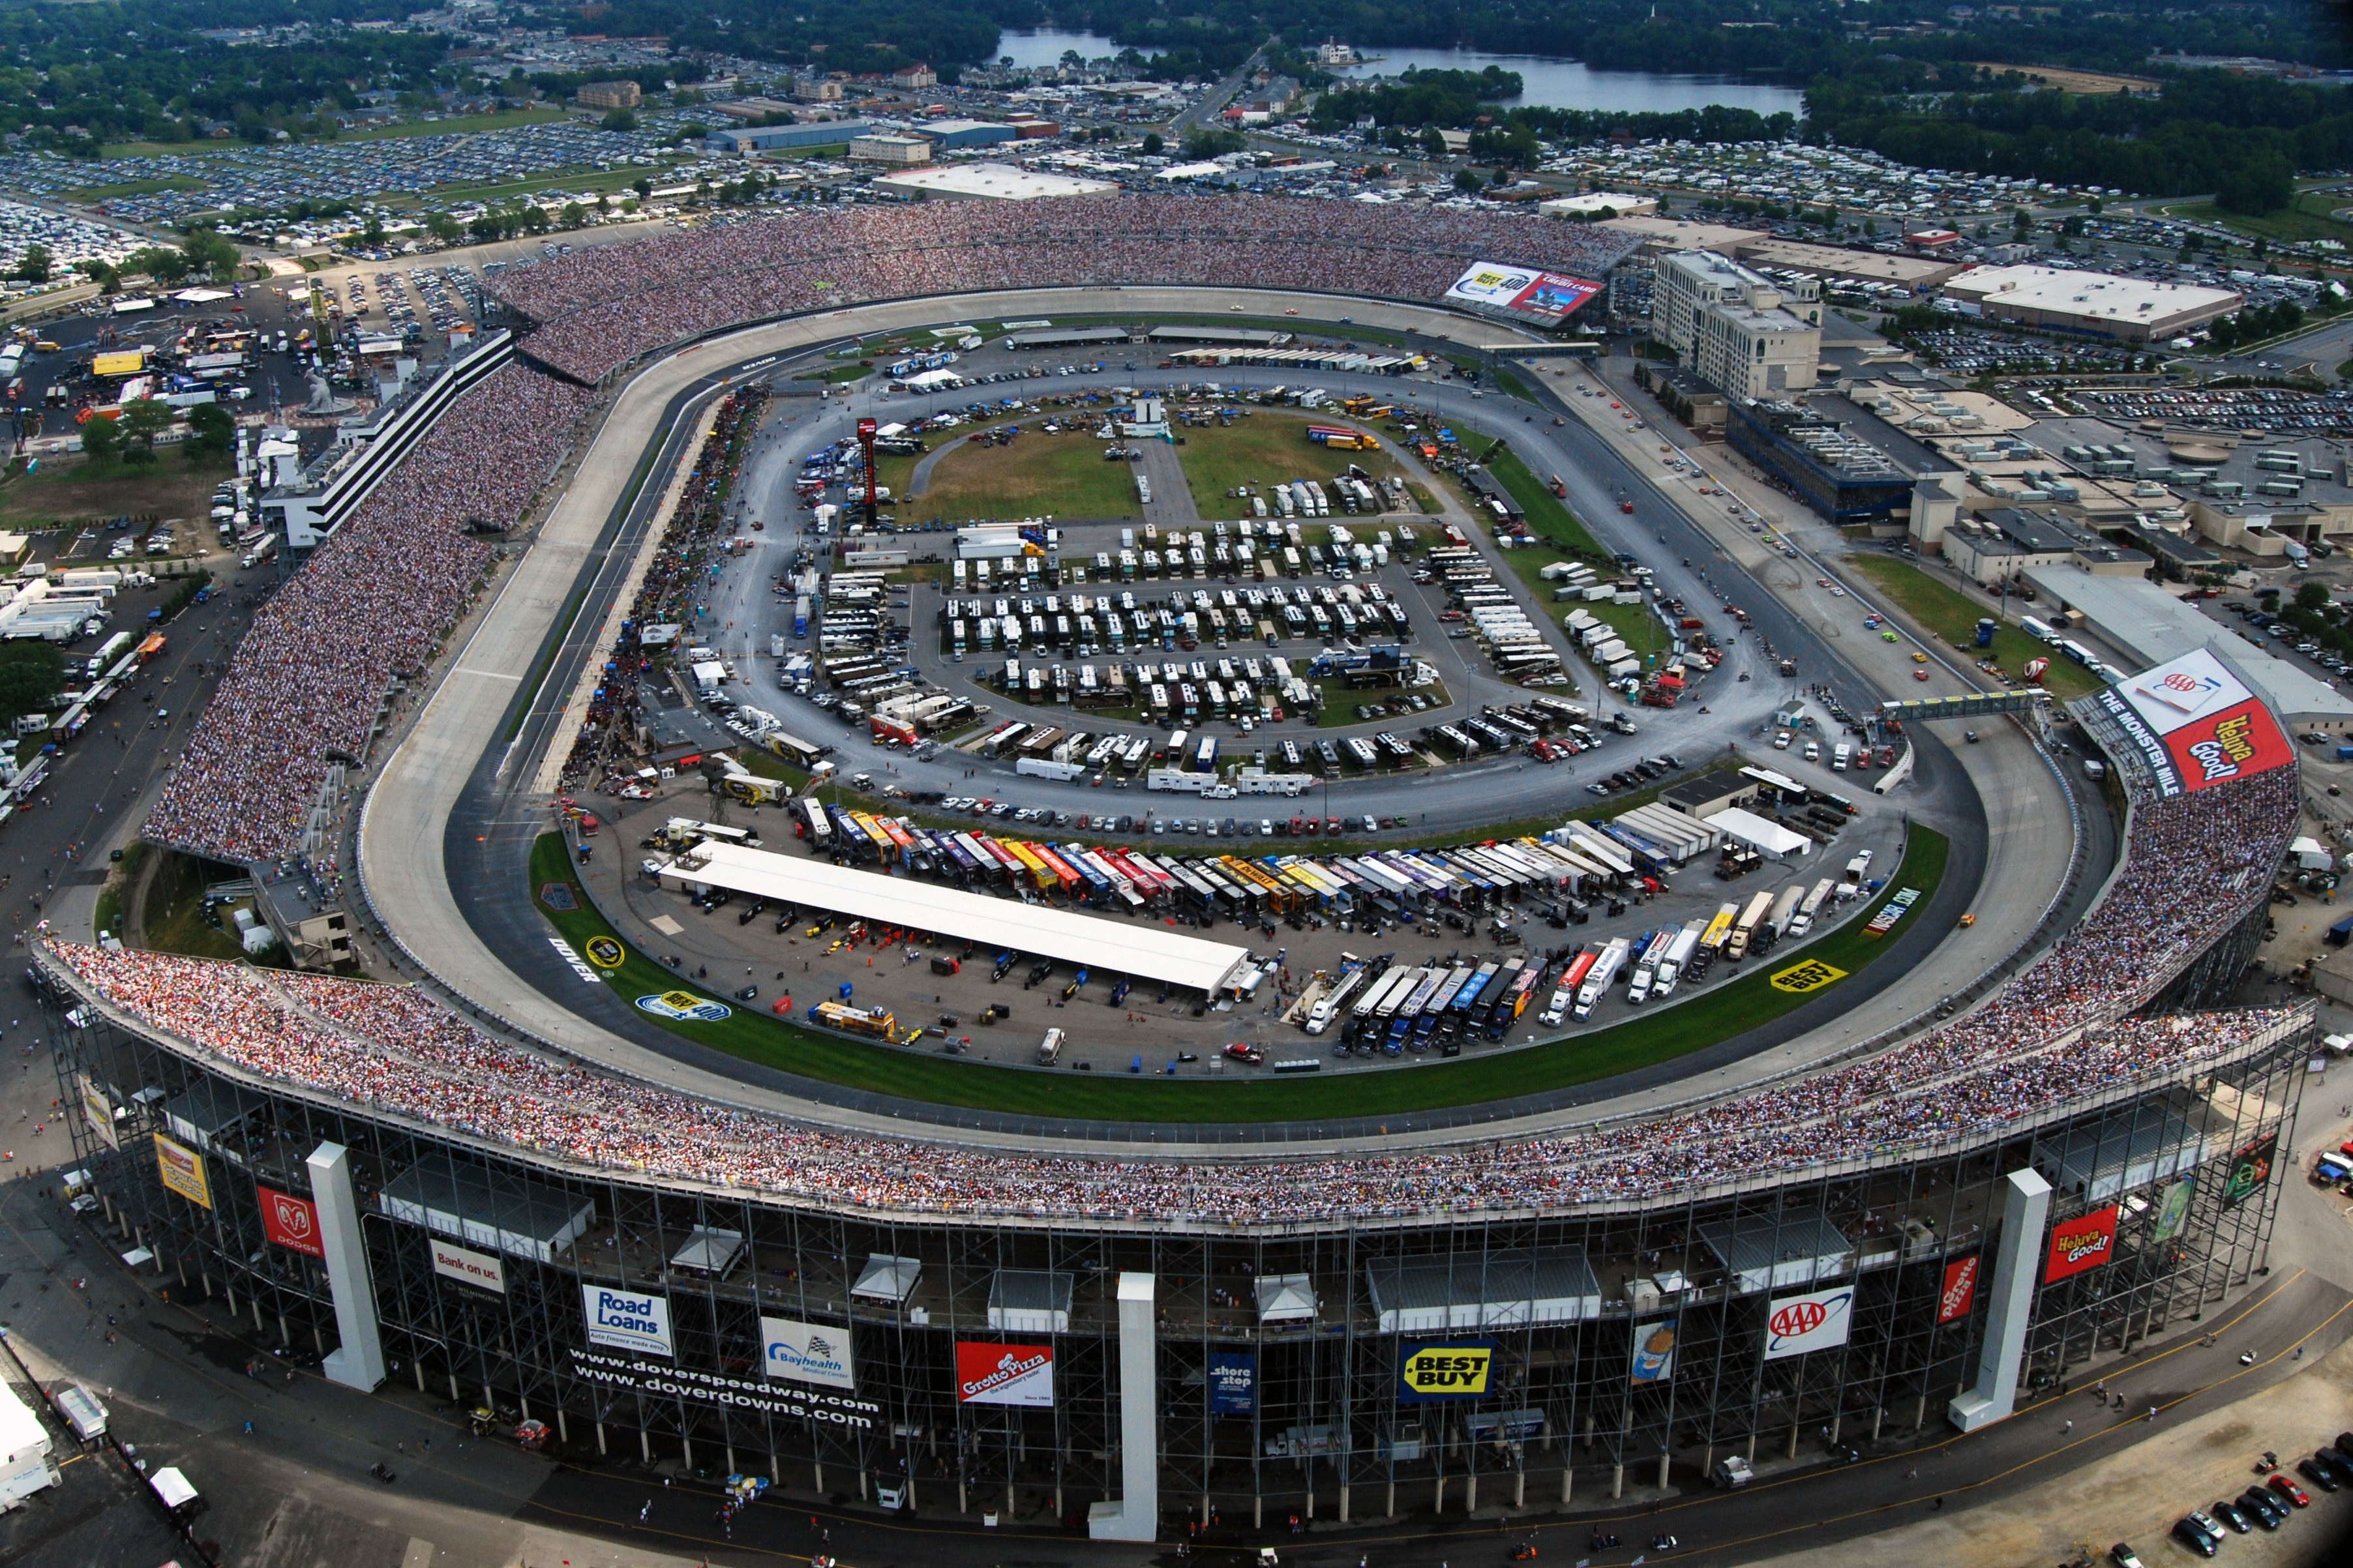 Dover International Speedway hosts NASCAR races and is known in the sport as "The Monster Mile."